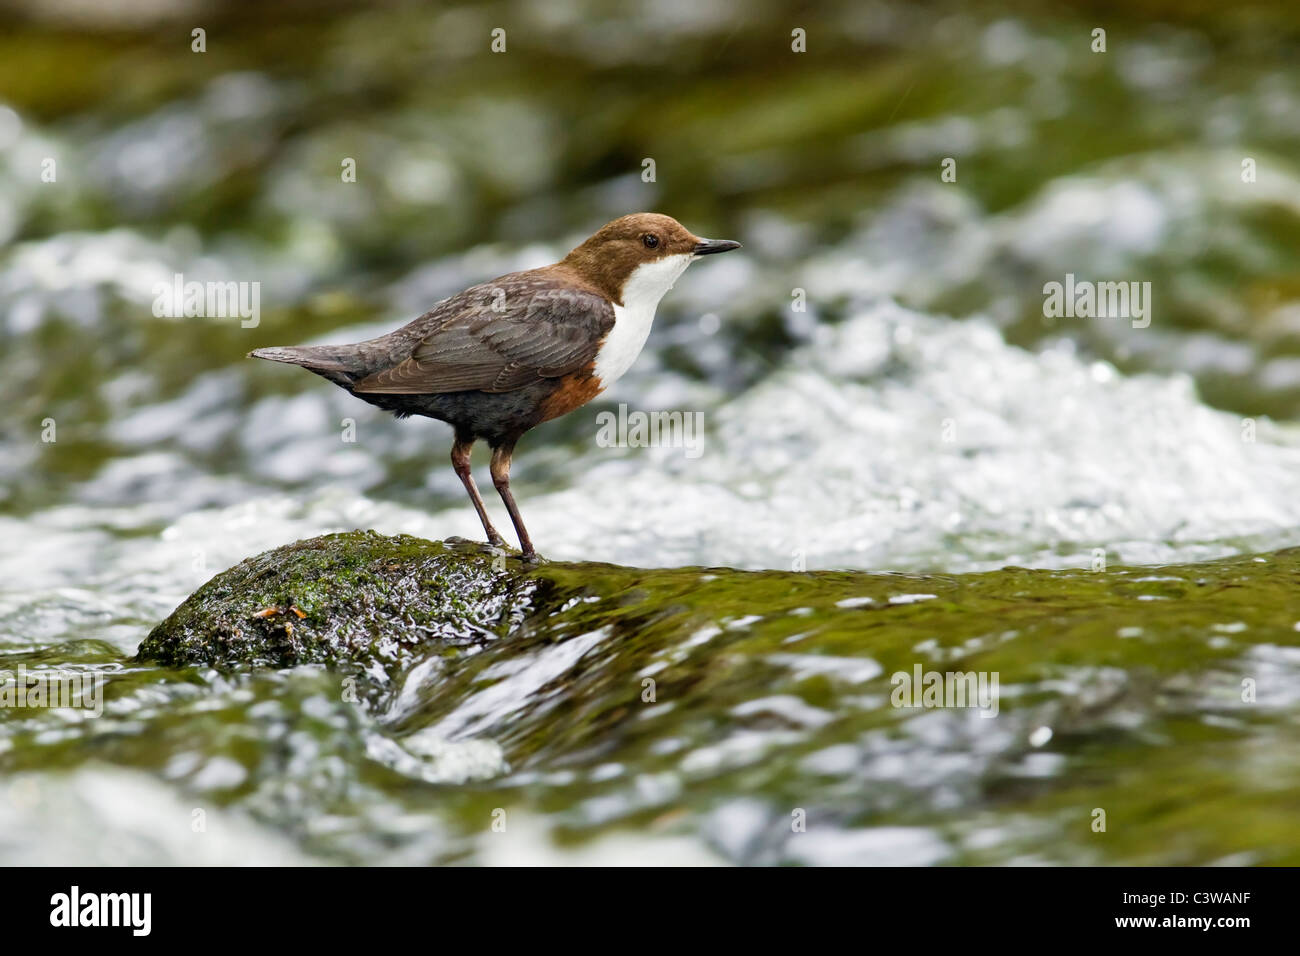 Dipper perched on rock in fast flowing river Stock Photo